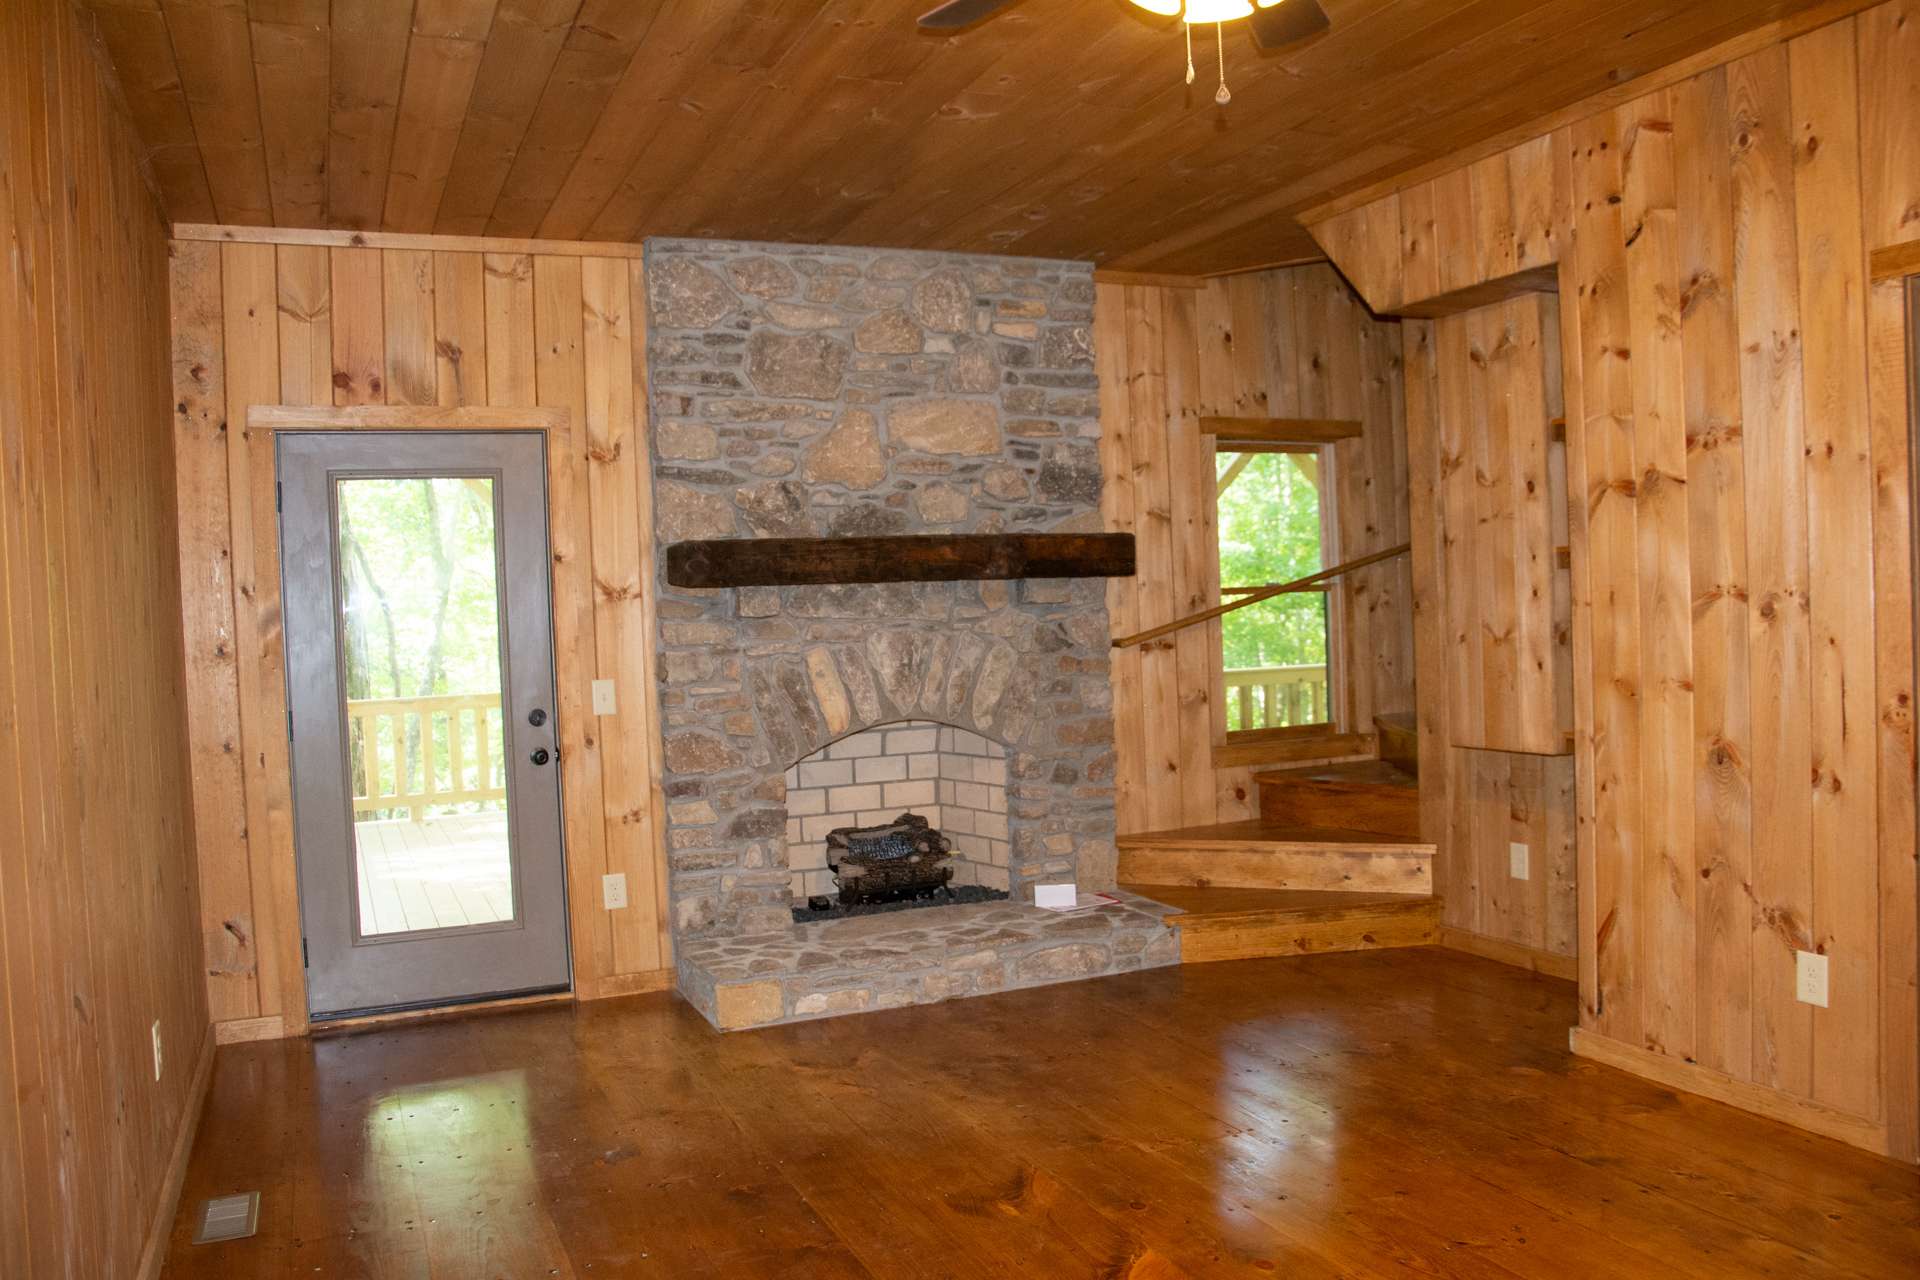 The lower level will provide a den area featuring the second stone fireplace with gas logs, bedroom, full bath, laundry area, and lower level deck.